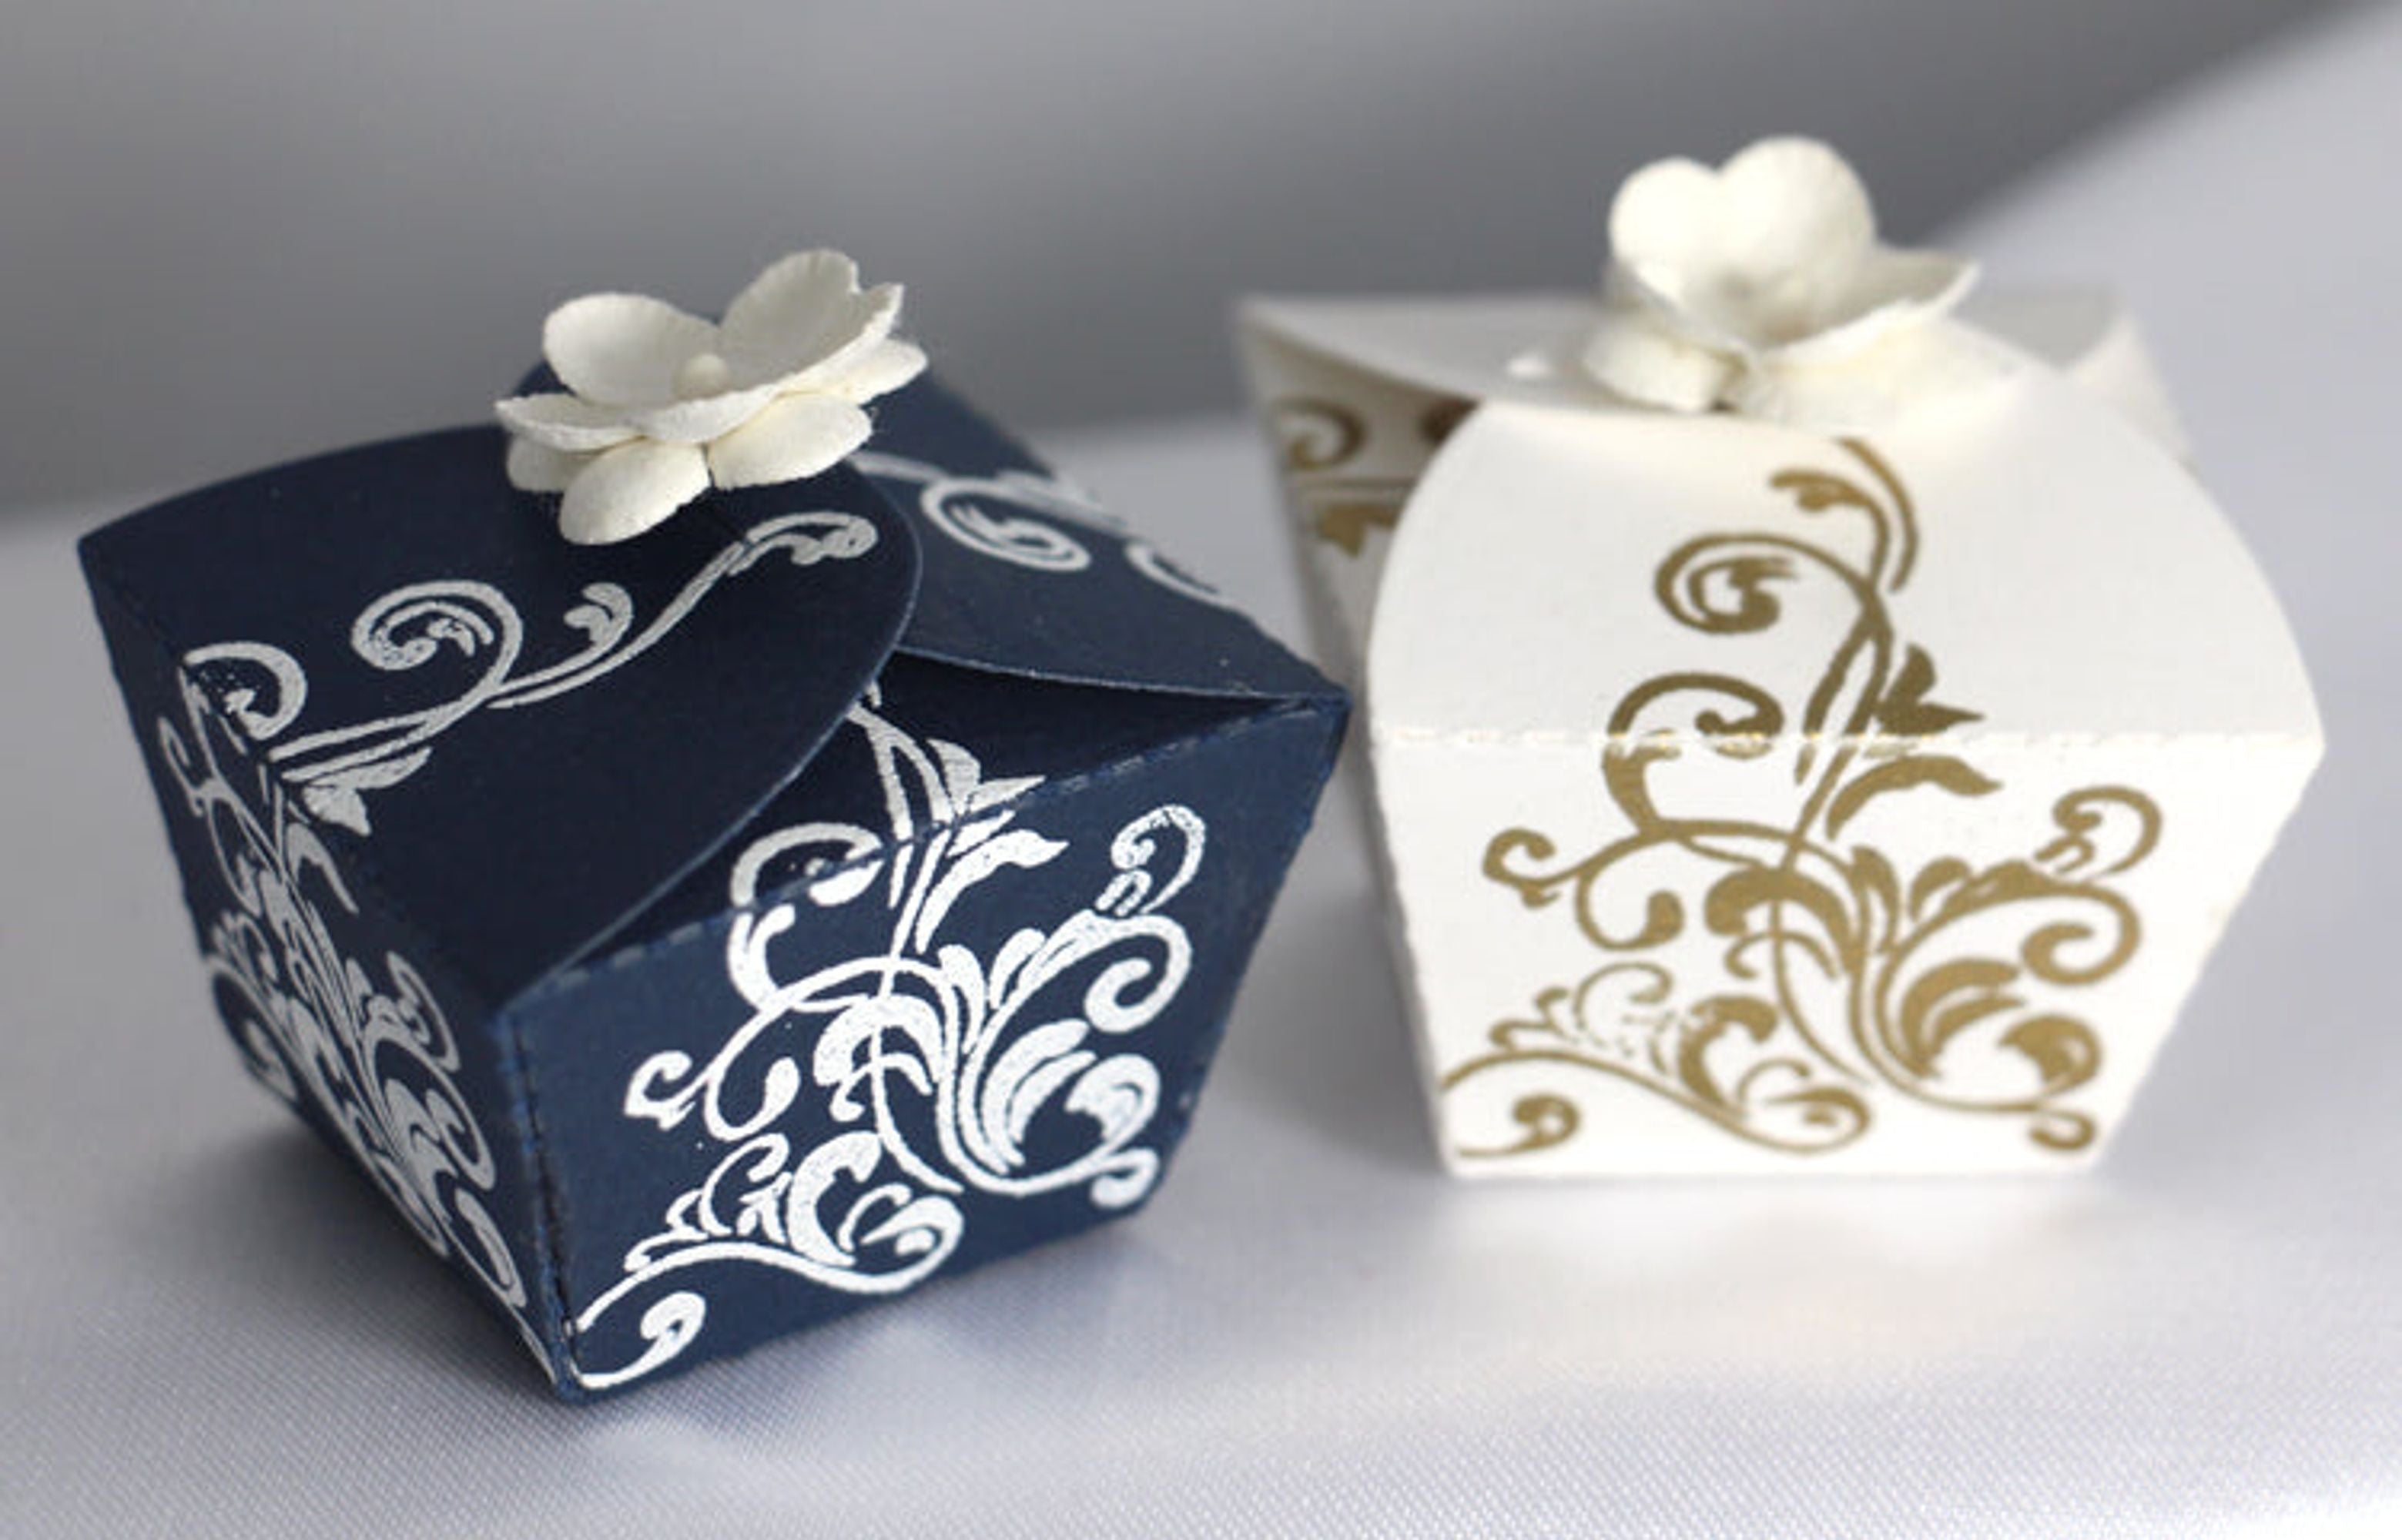 Wrapping Die Gift Box 1 - Jewelry